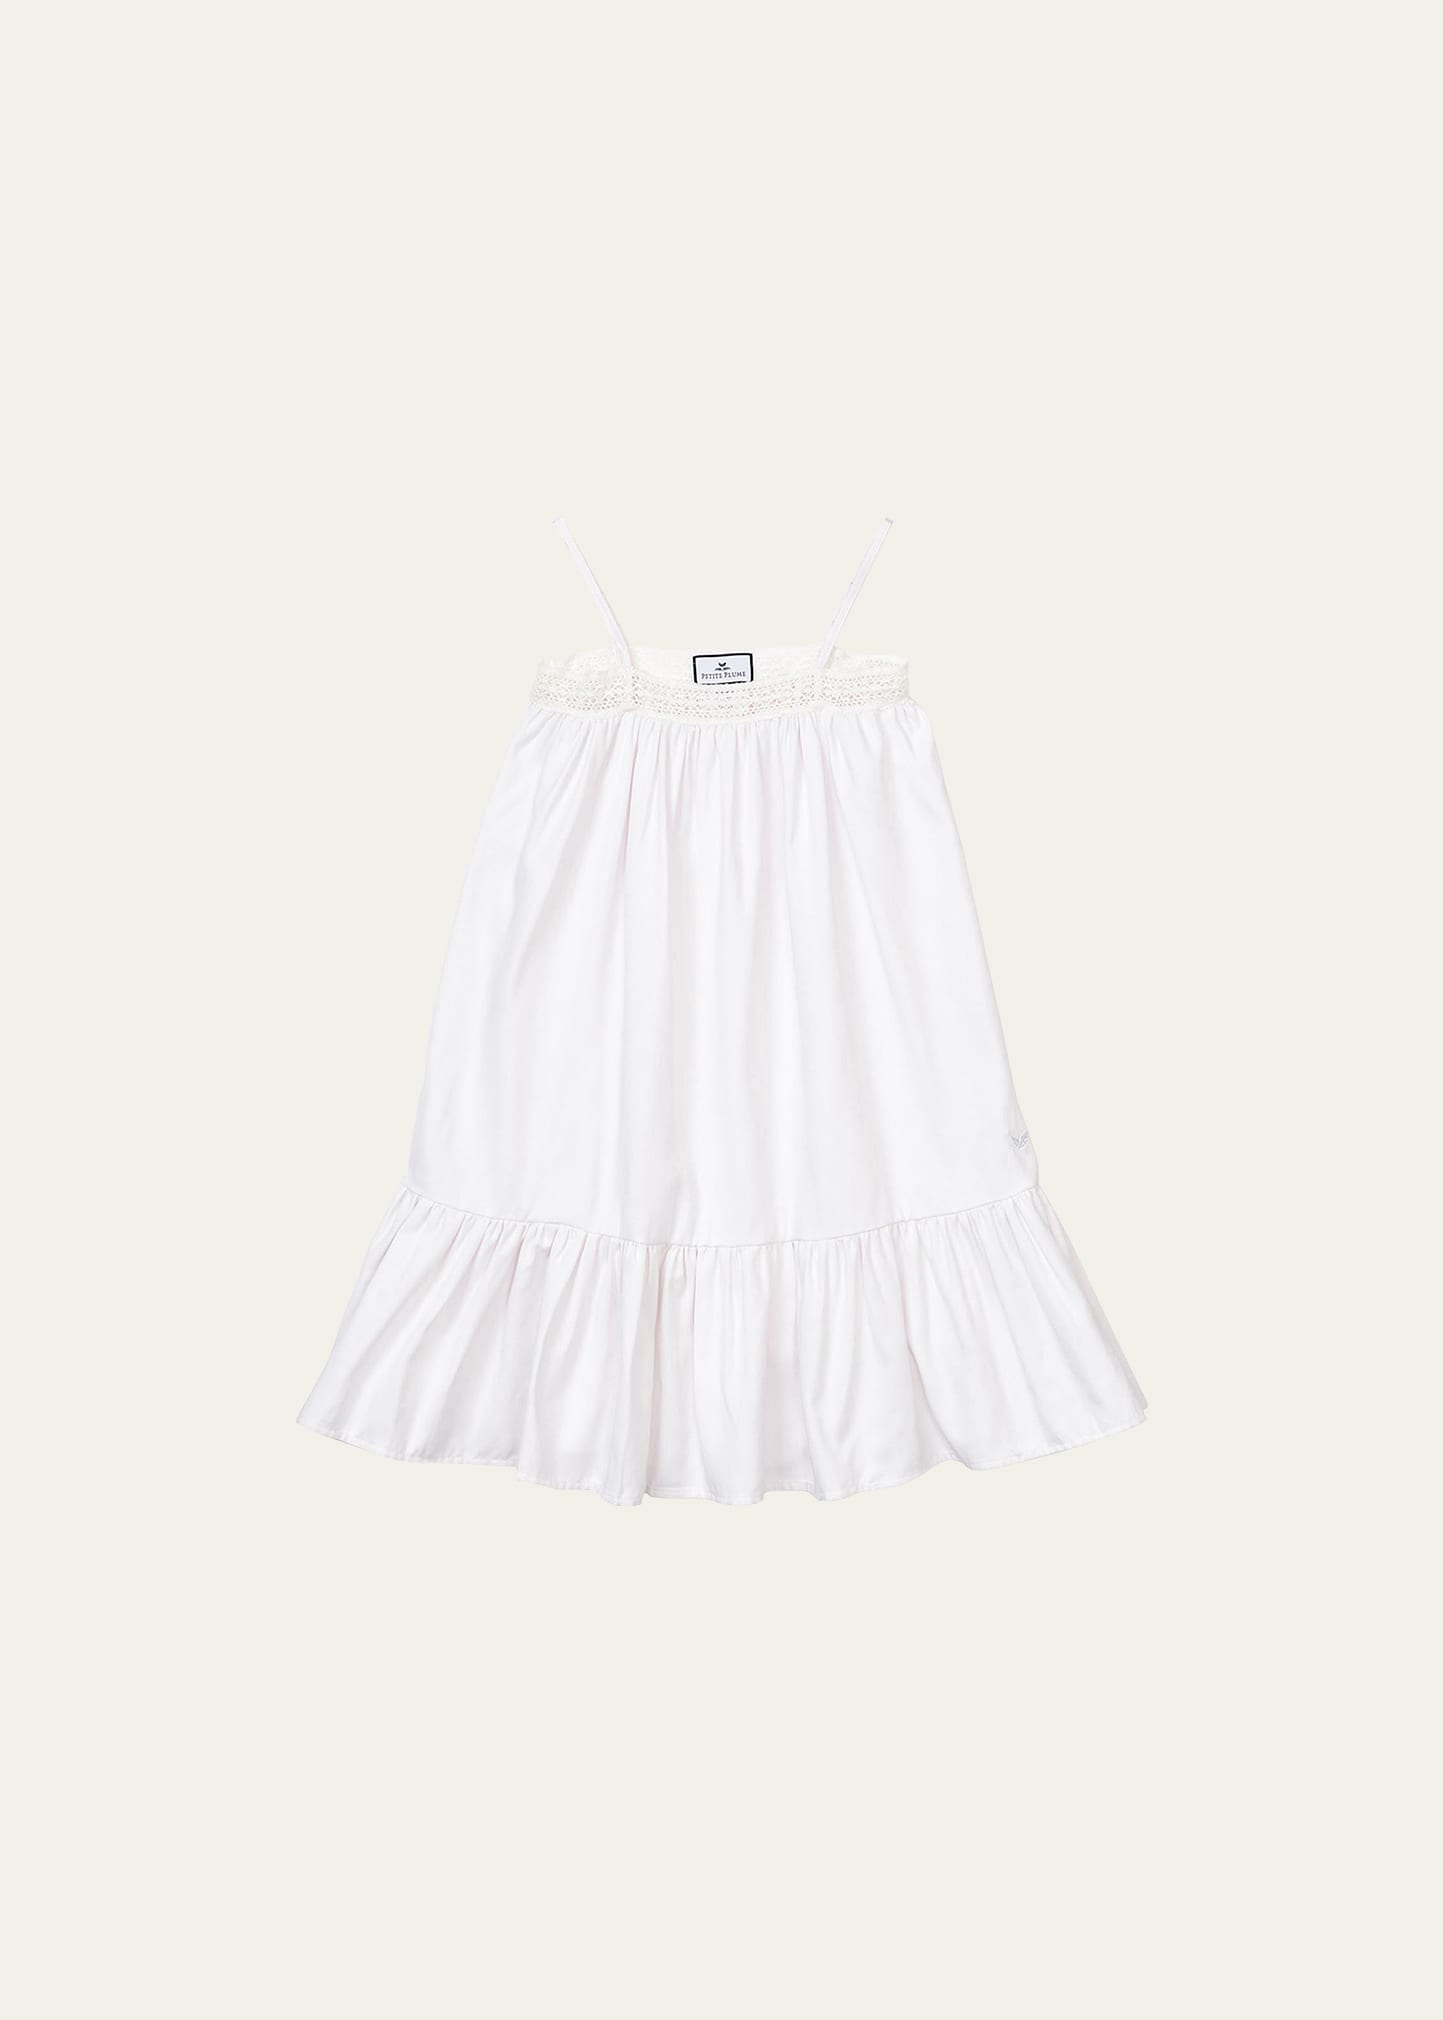 Shop Petite Plume Girl's White Lily Nightgown